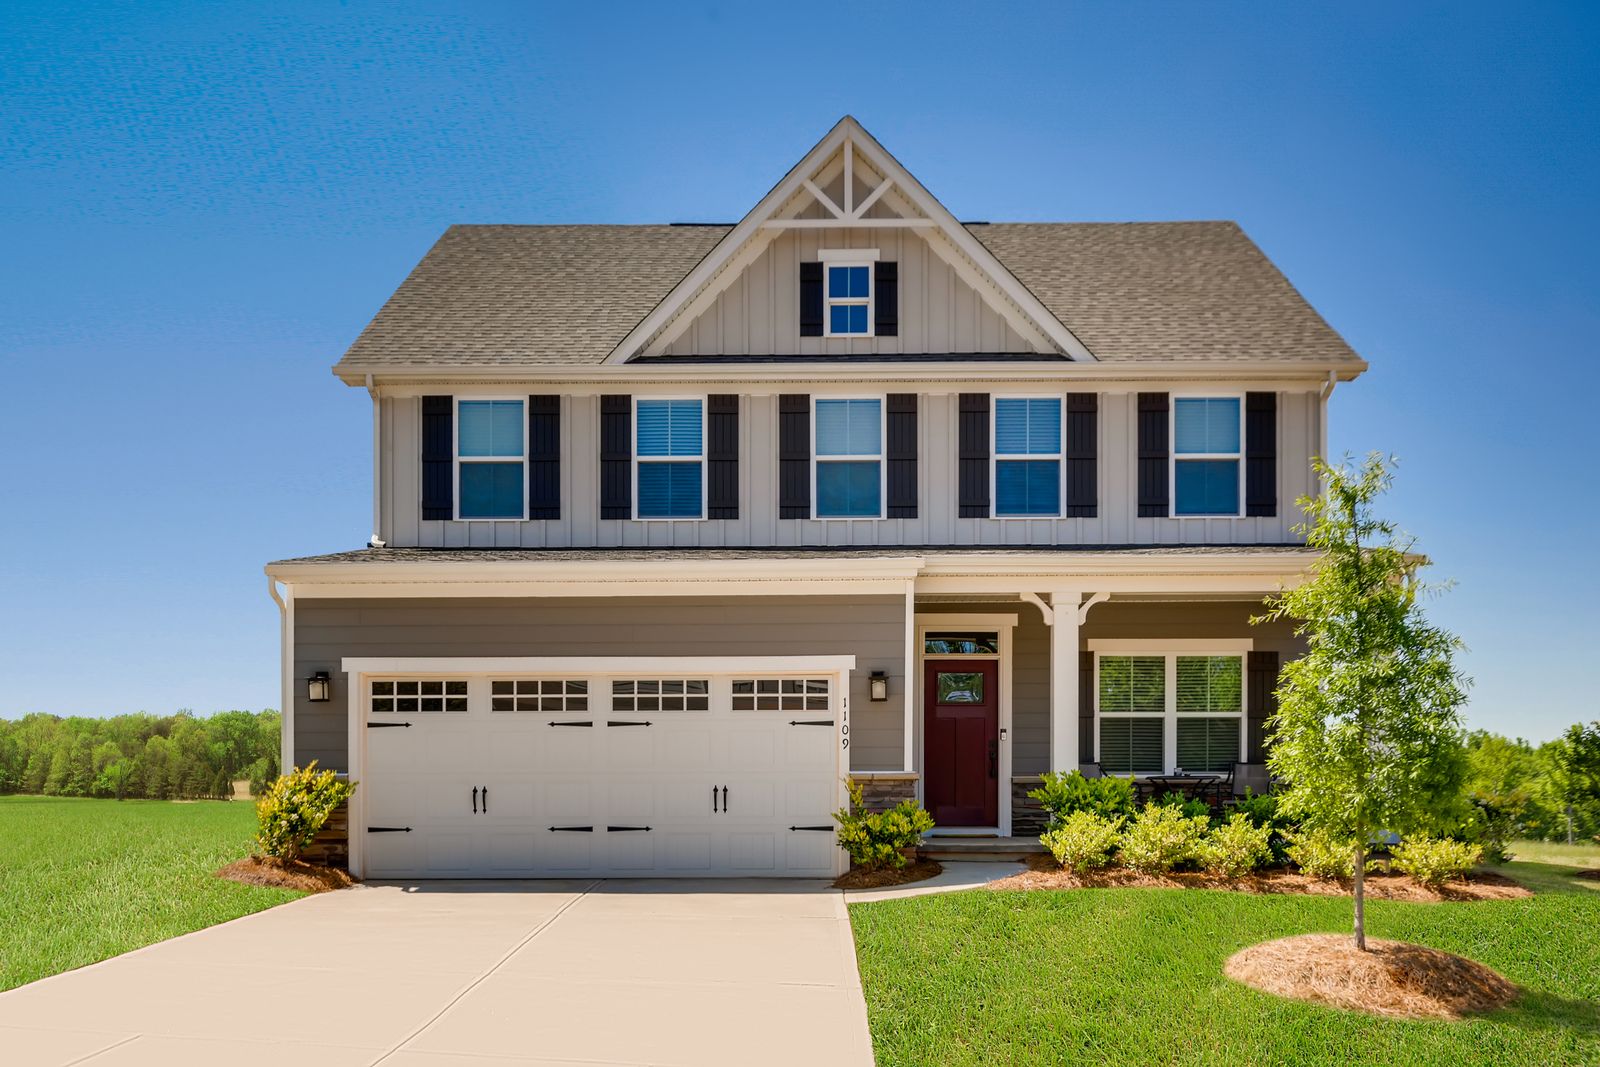 WELCOME HOME TO TWIN OAKS! SARVER'S PREMIERE NEW HOME COMMUNITY!